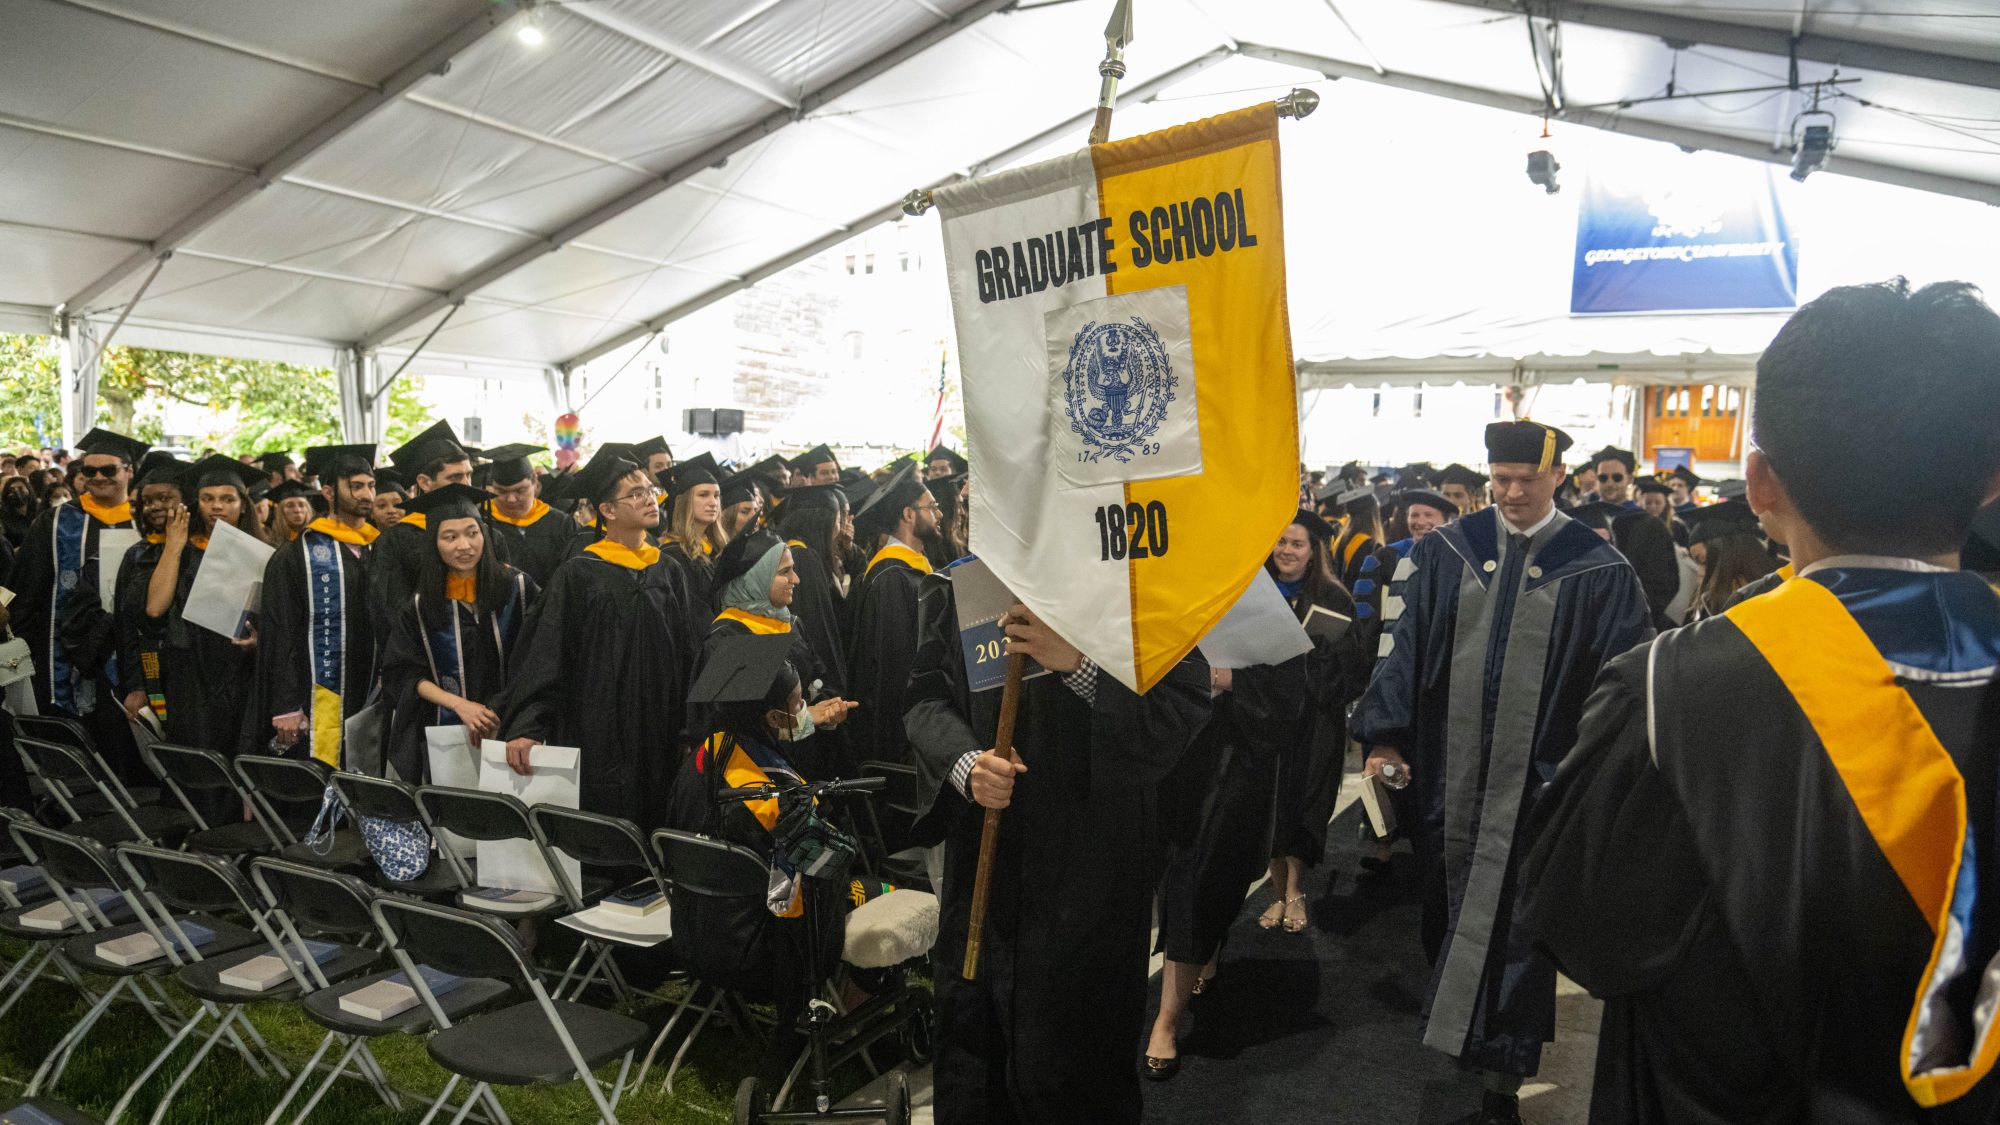 Graduate students wearing caps and gowns line Healy Lawn at commencement with the Graduate School banner (half white, L, and half yellow, R) being carried by a student during the 2022 recessional